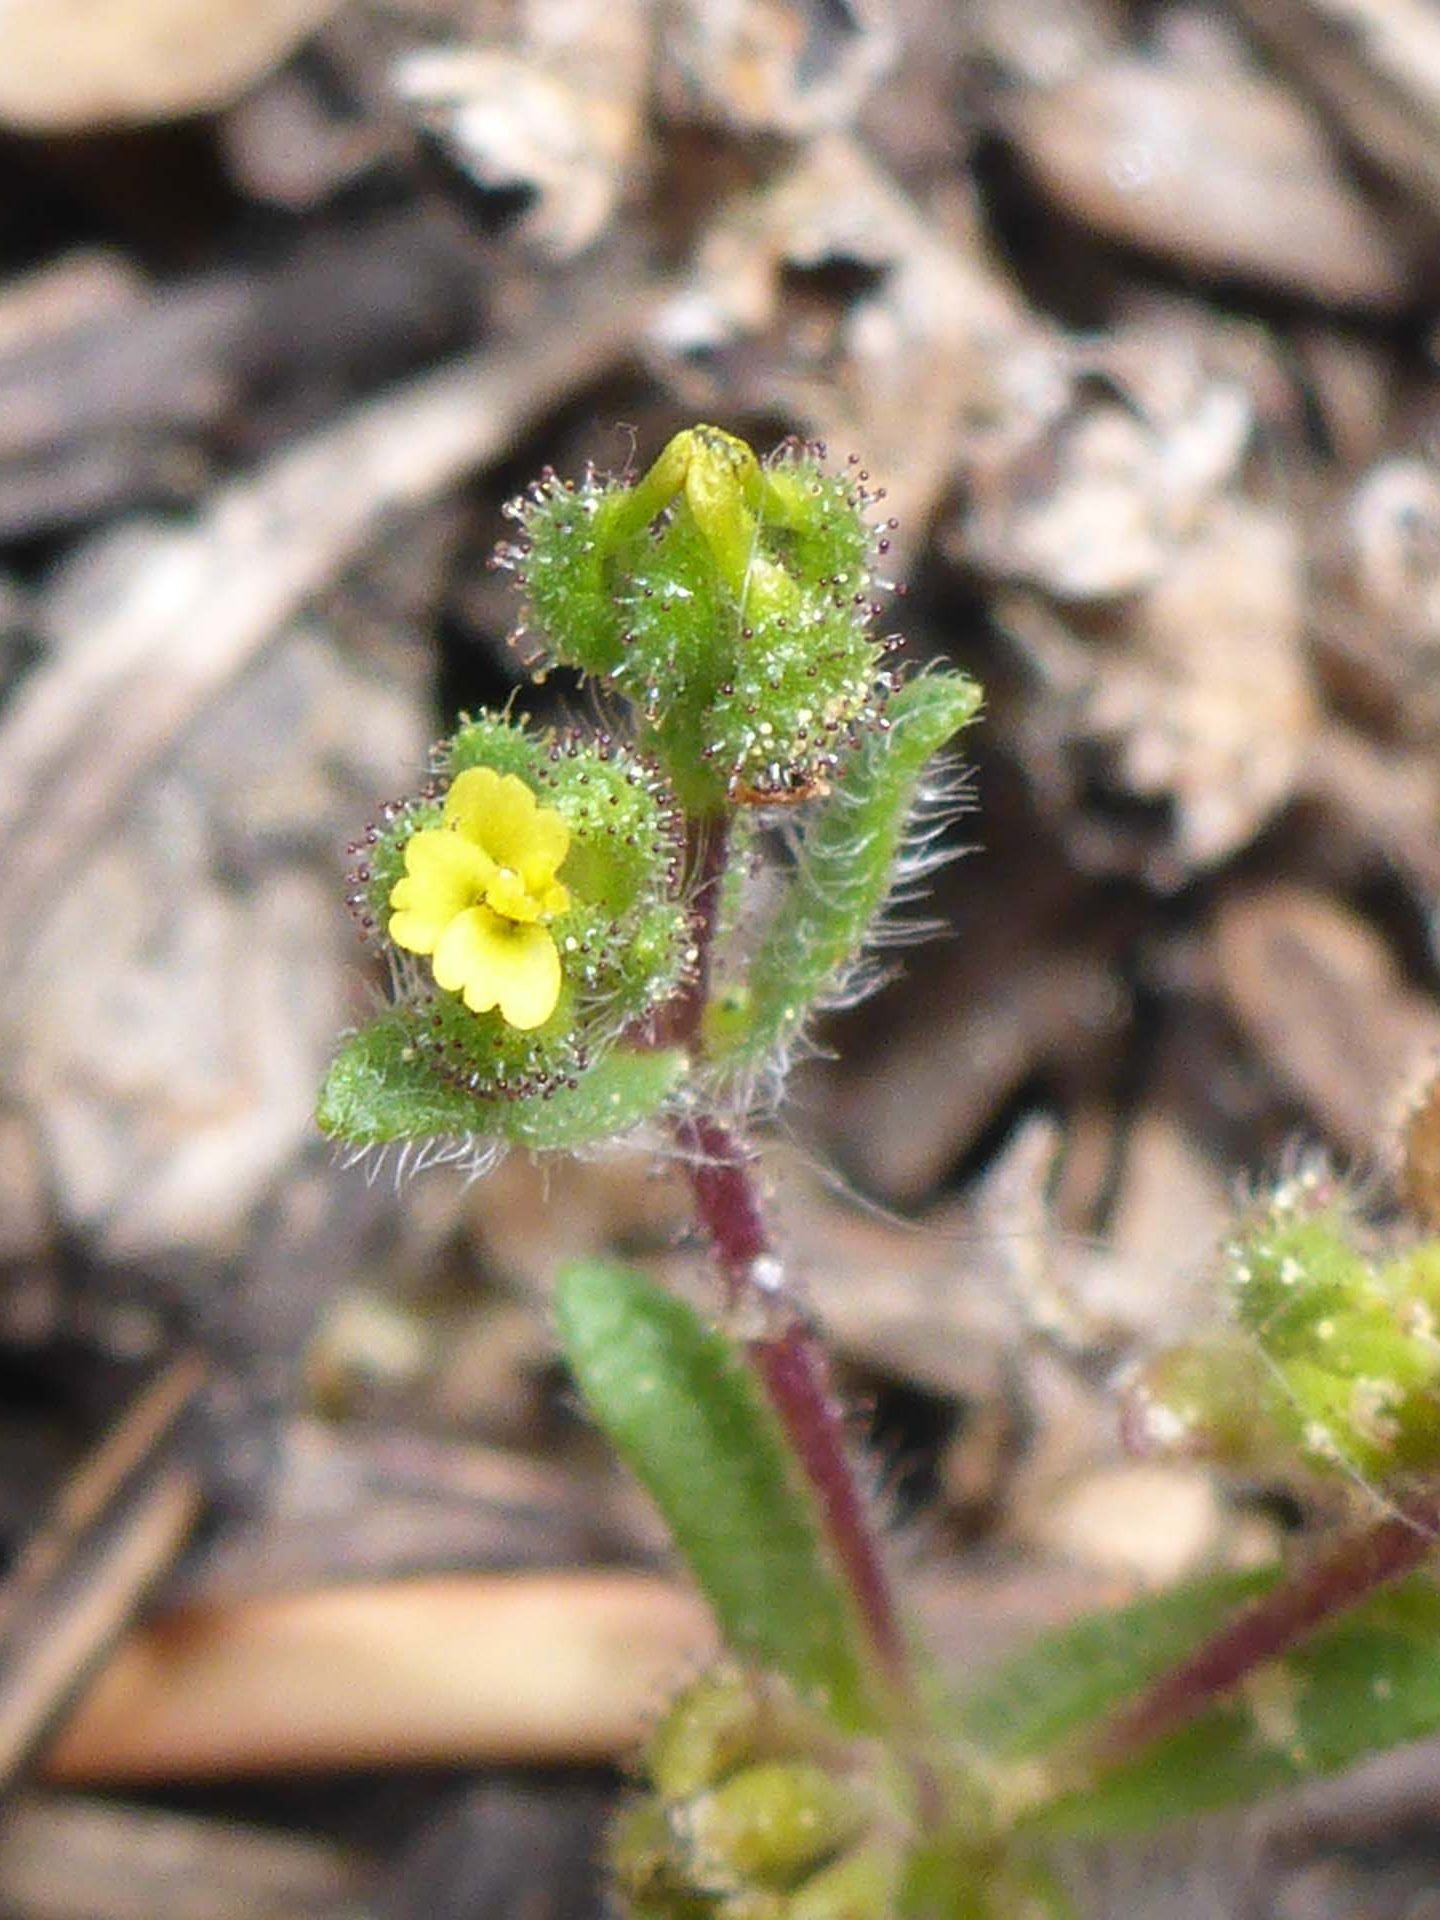 Opposite-leaved tarweed claoe-up. D. Burk.